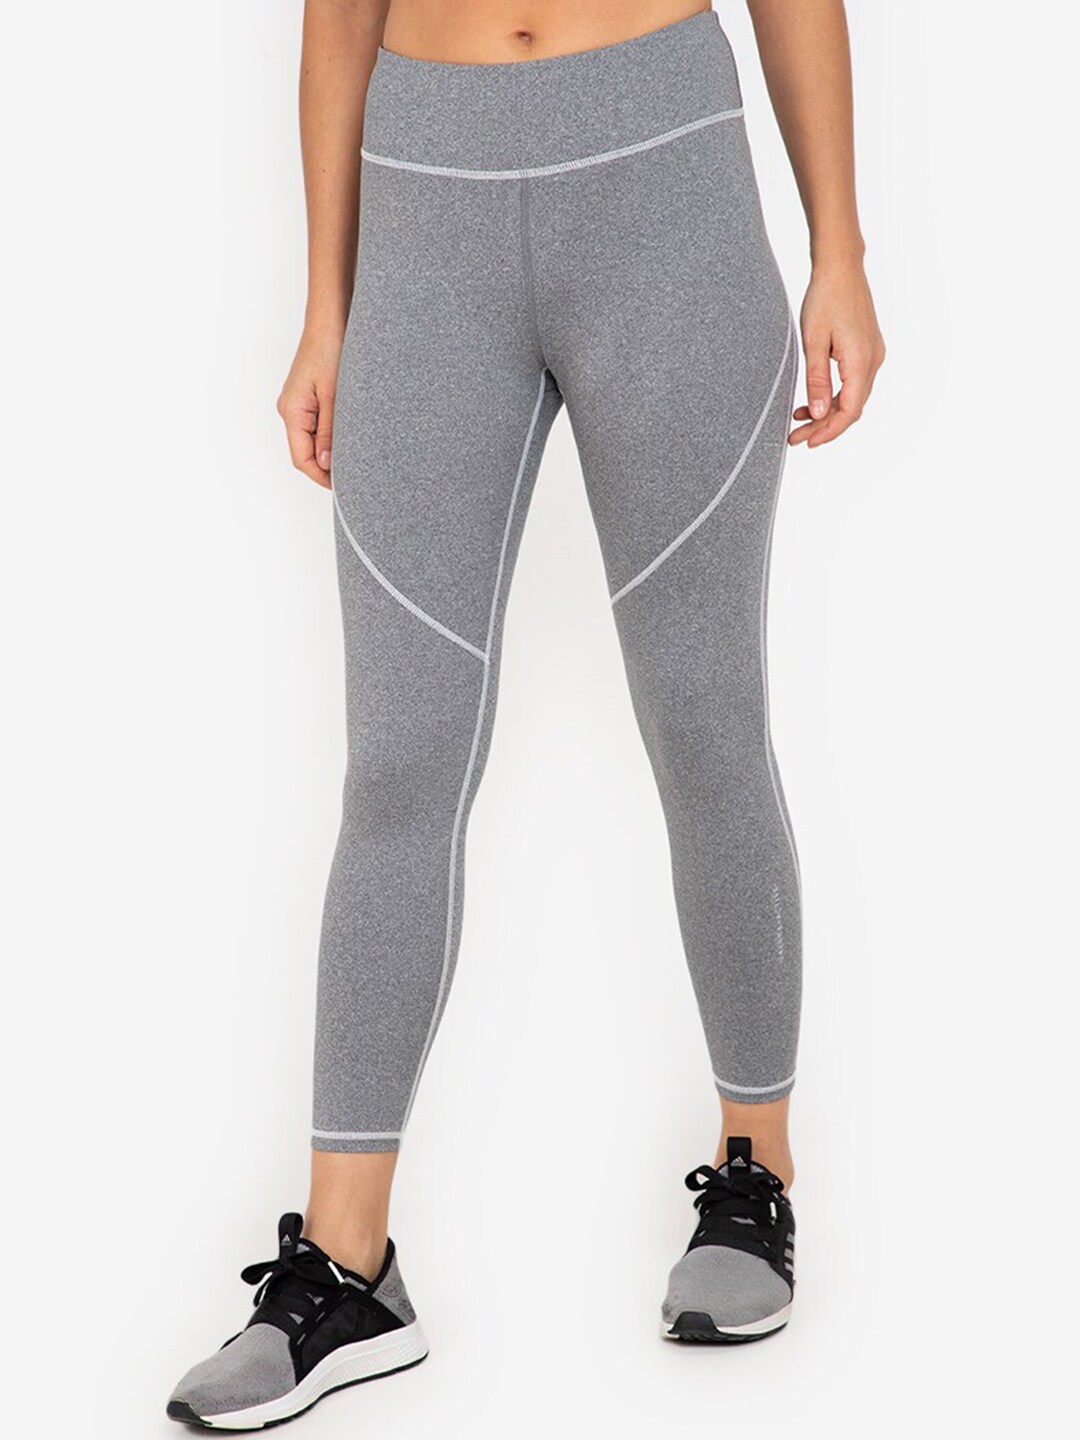 ZALORA ACTIVE Women Grey Contrast Stitch High Rise Tights Price in India